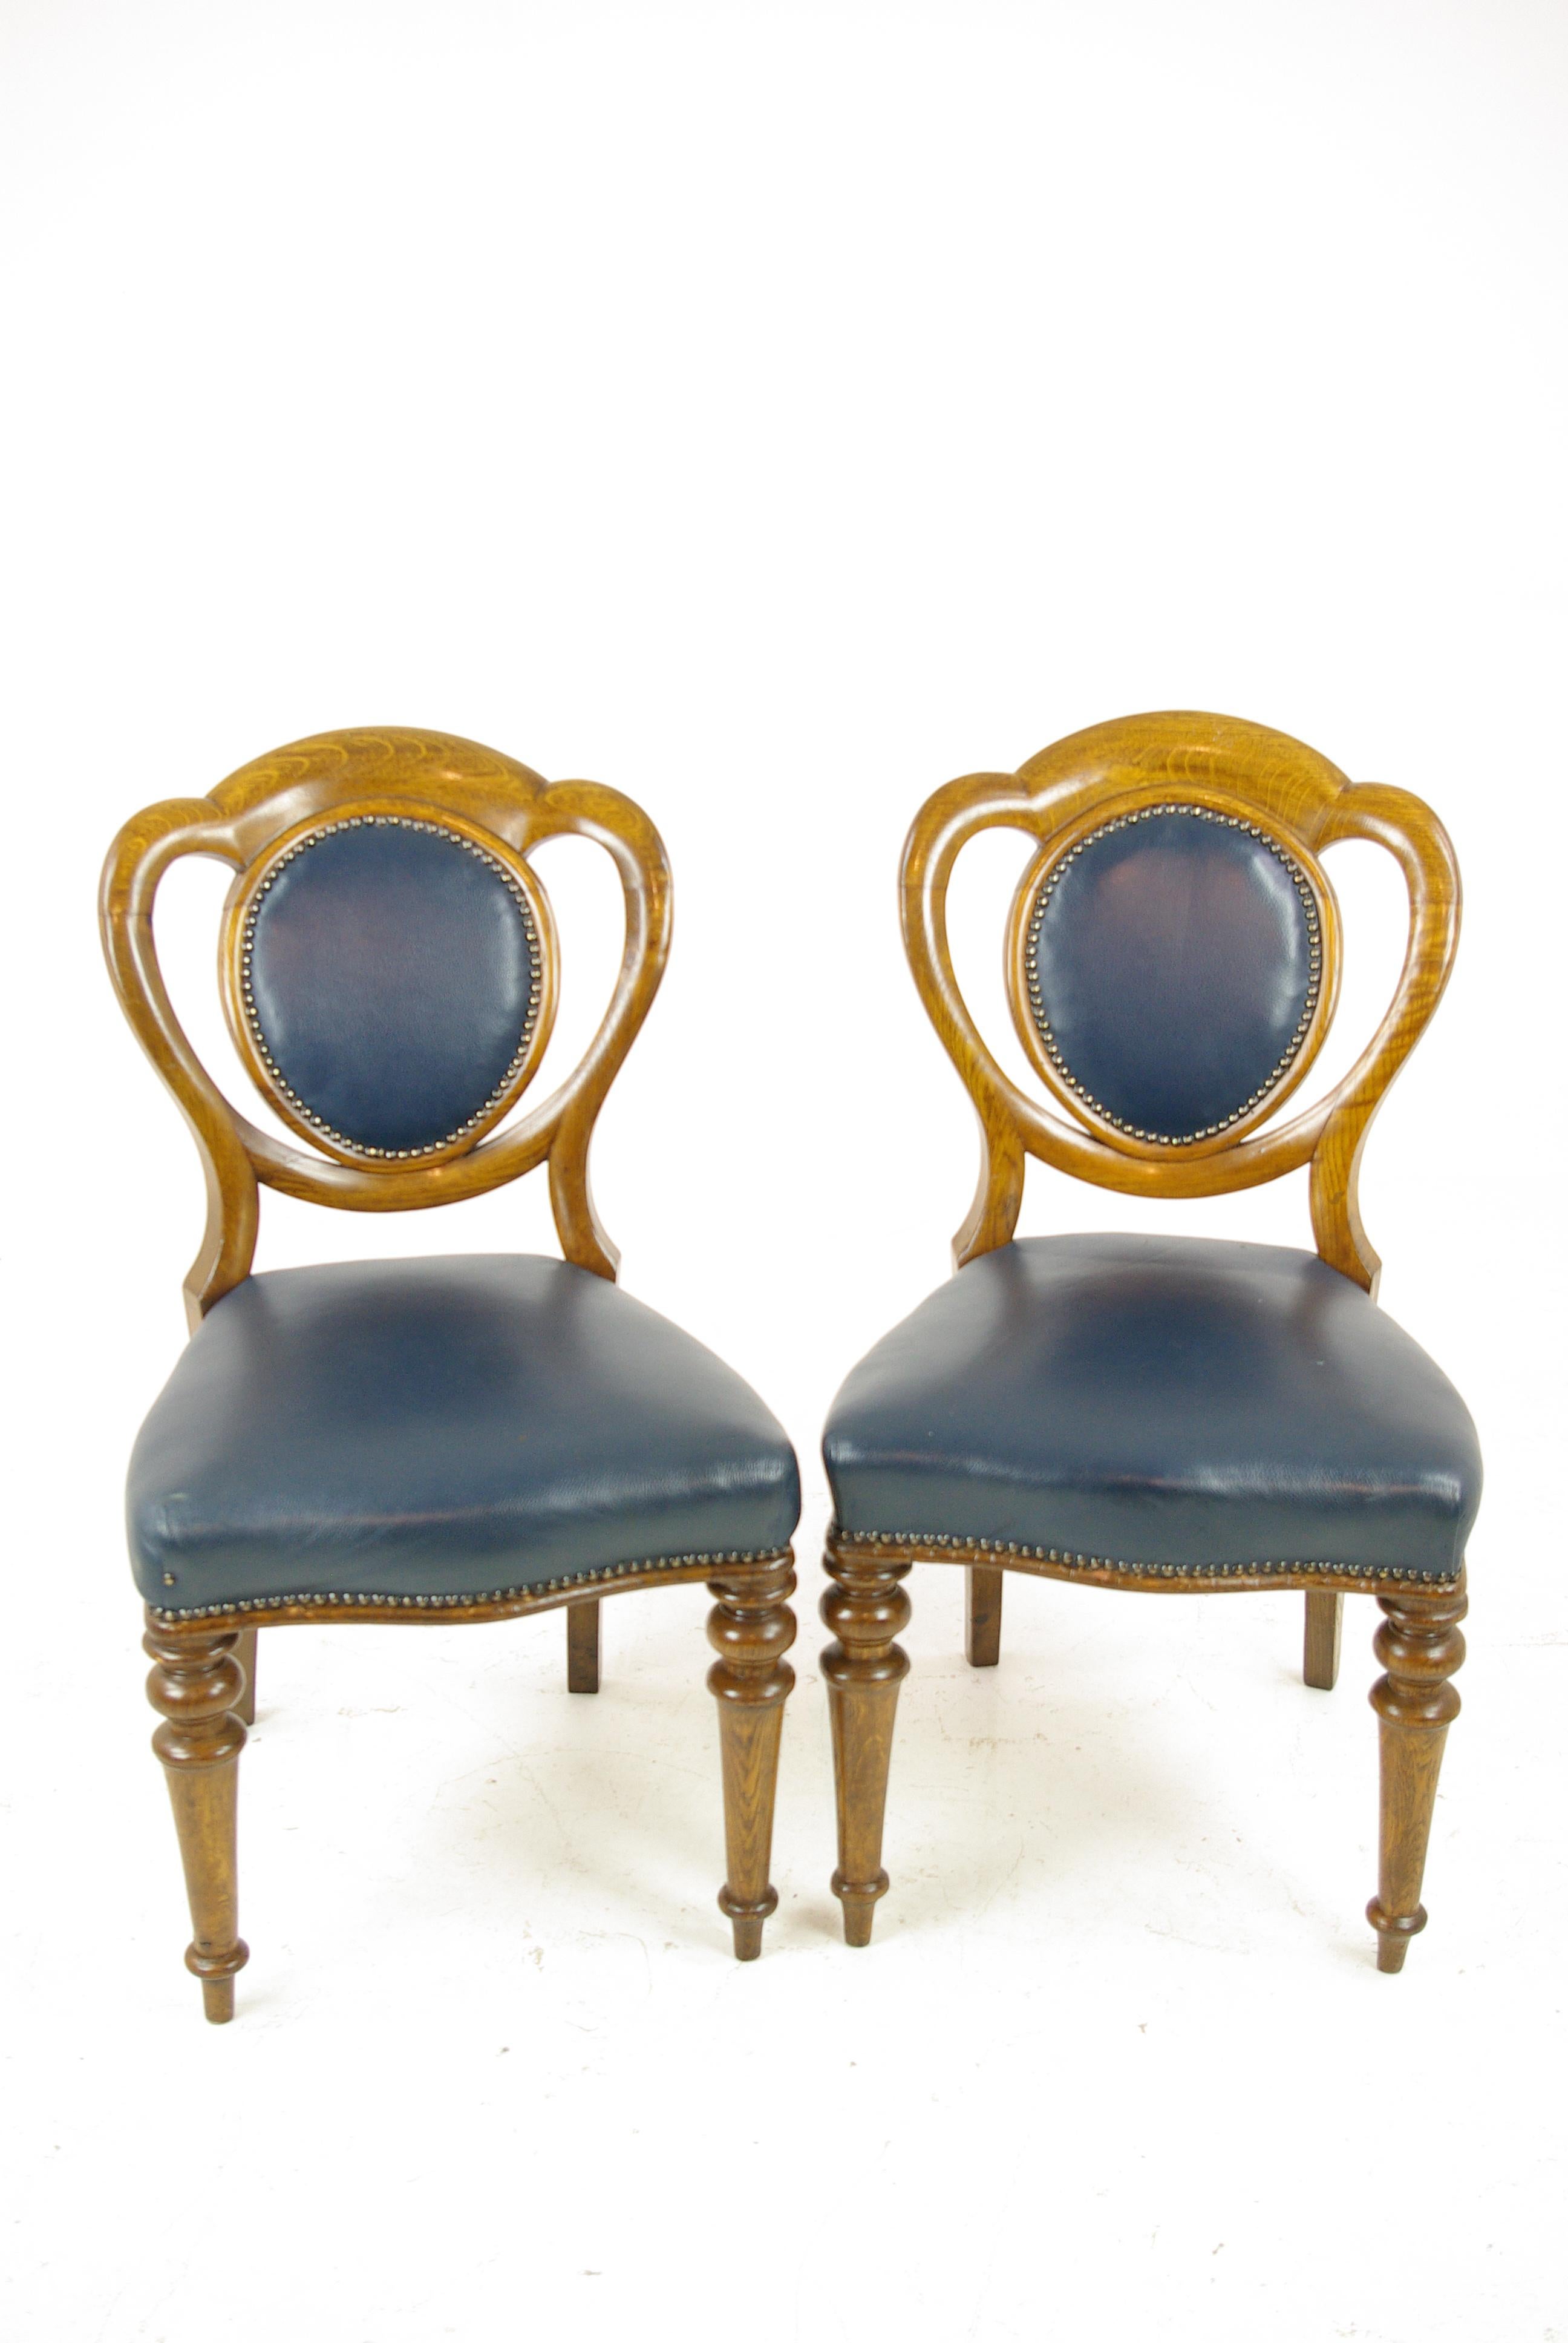 Pair tiger oak office chairs, desk chairs, office chairs, Scotland 1880, B1320

Scotland, 1920
Solid tiger oak construction
Original finish
Open back
Oval shaped back with blue leather insert
Upholstered seat with brass studs
Ending on